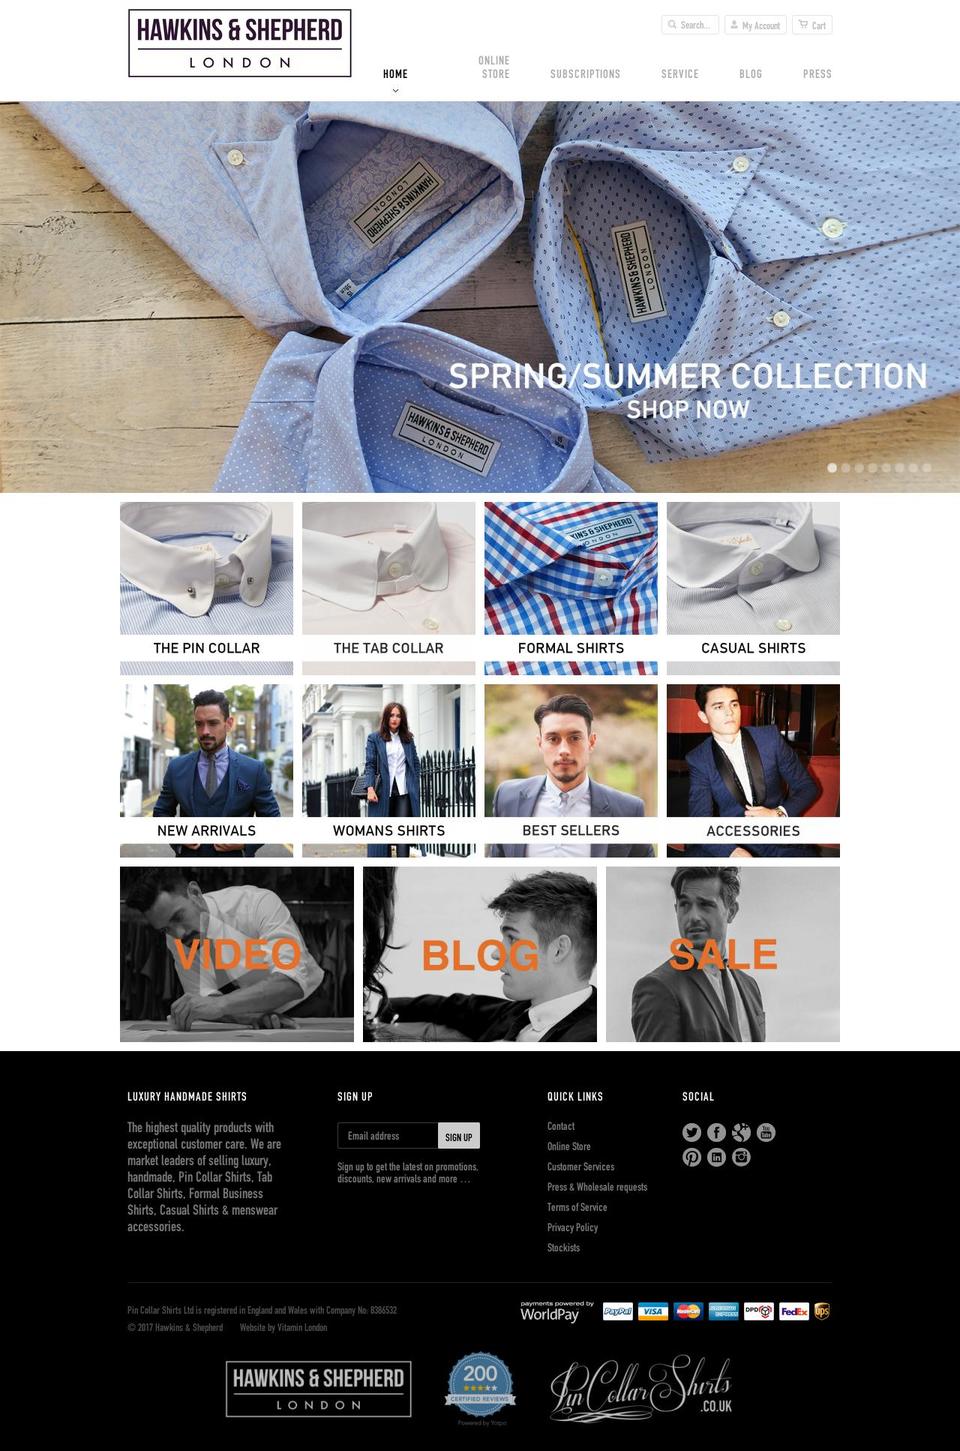 Reformation Shopify theme site example pincollarshirts.co.uk